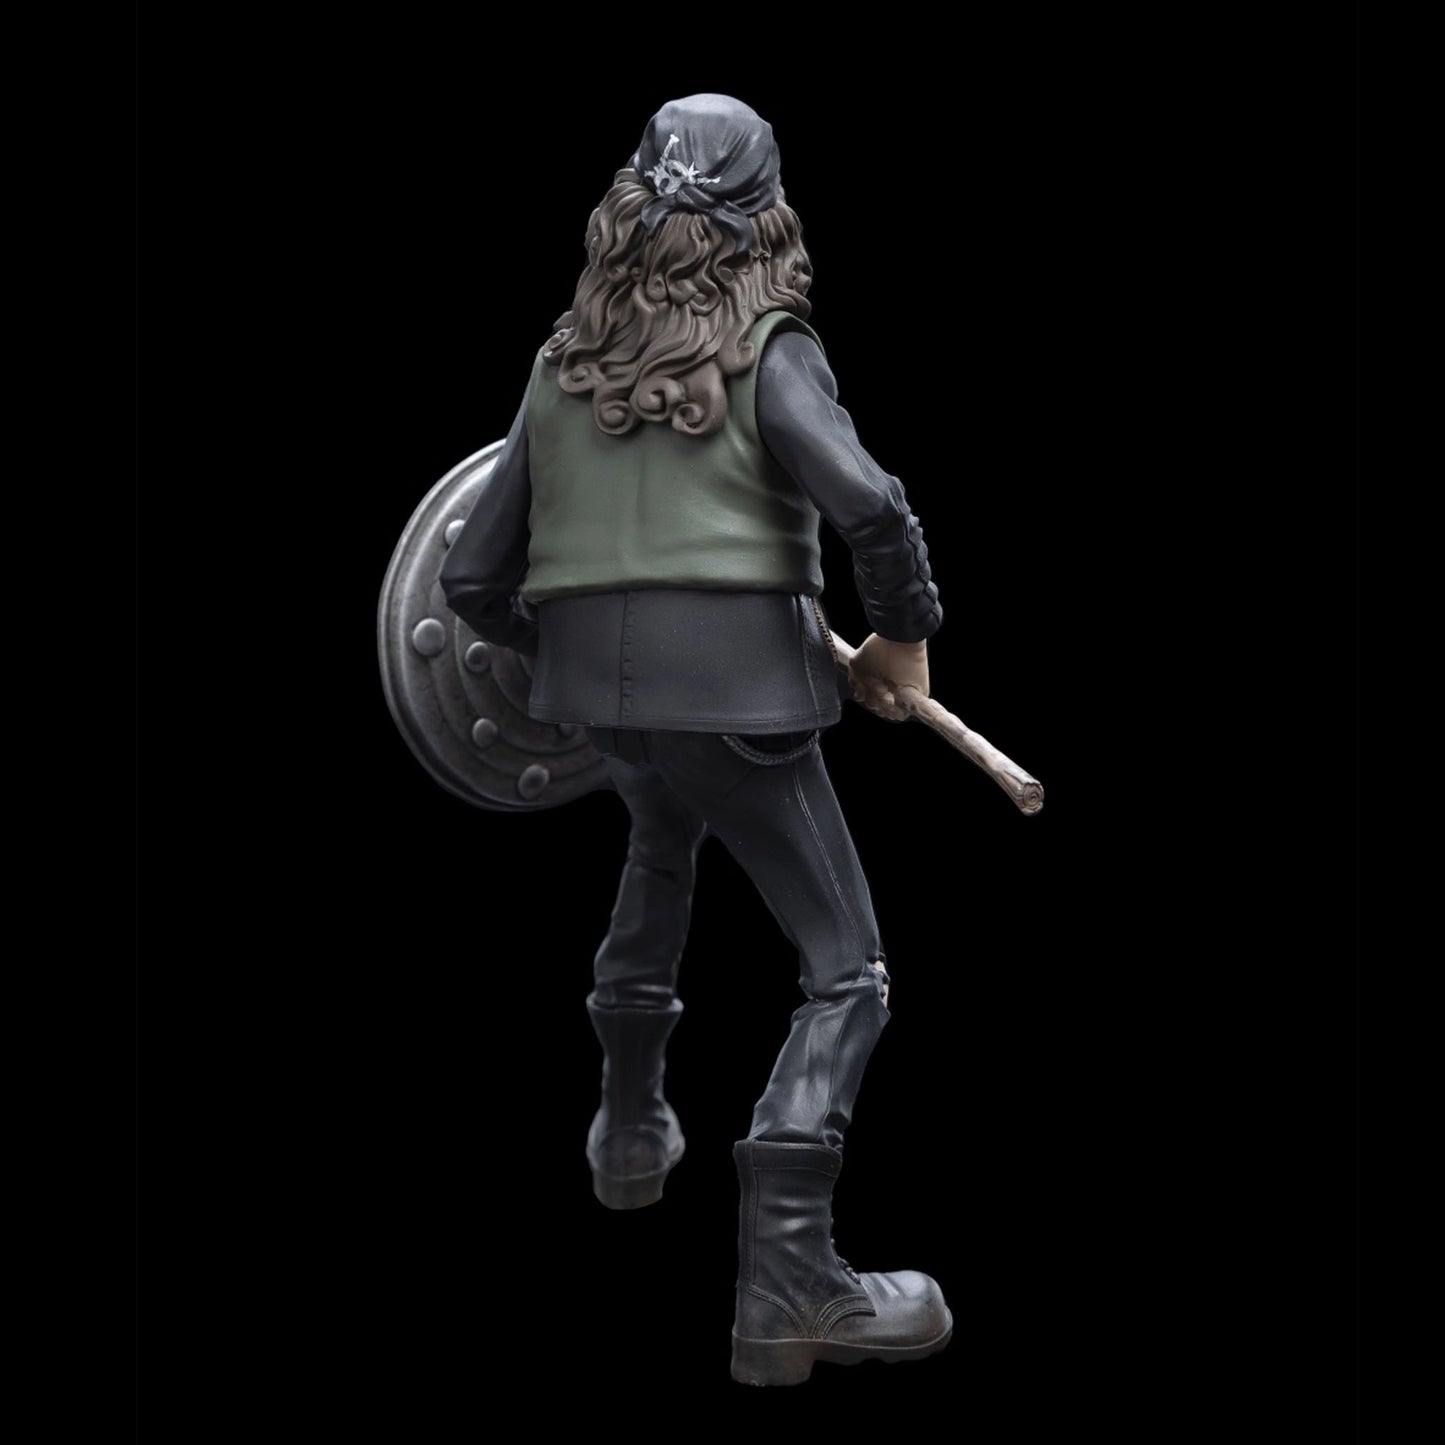 Load image into Gallery viewer, Eddie Munson with Shield (Stranger Things) Limited Edition Mini Epics Statue by Weta Workshop
